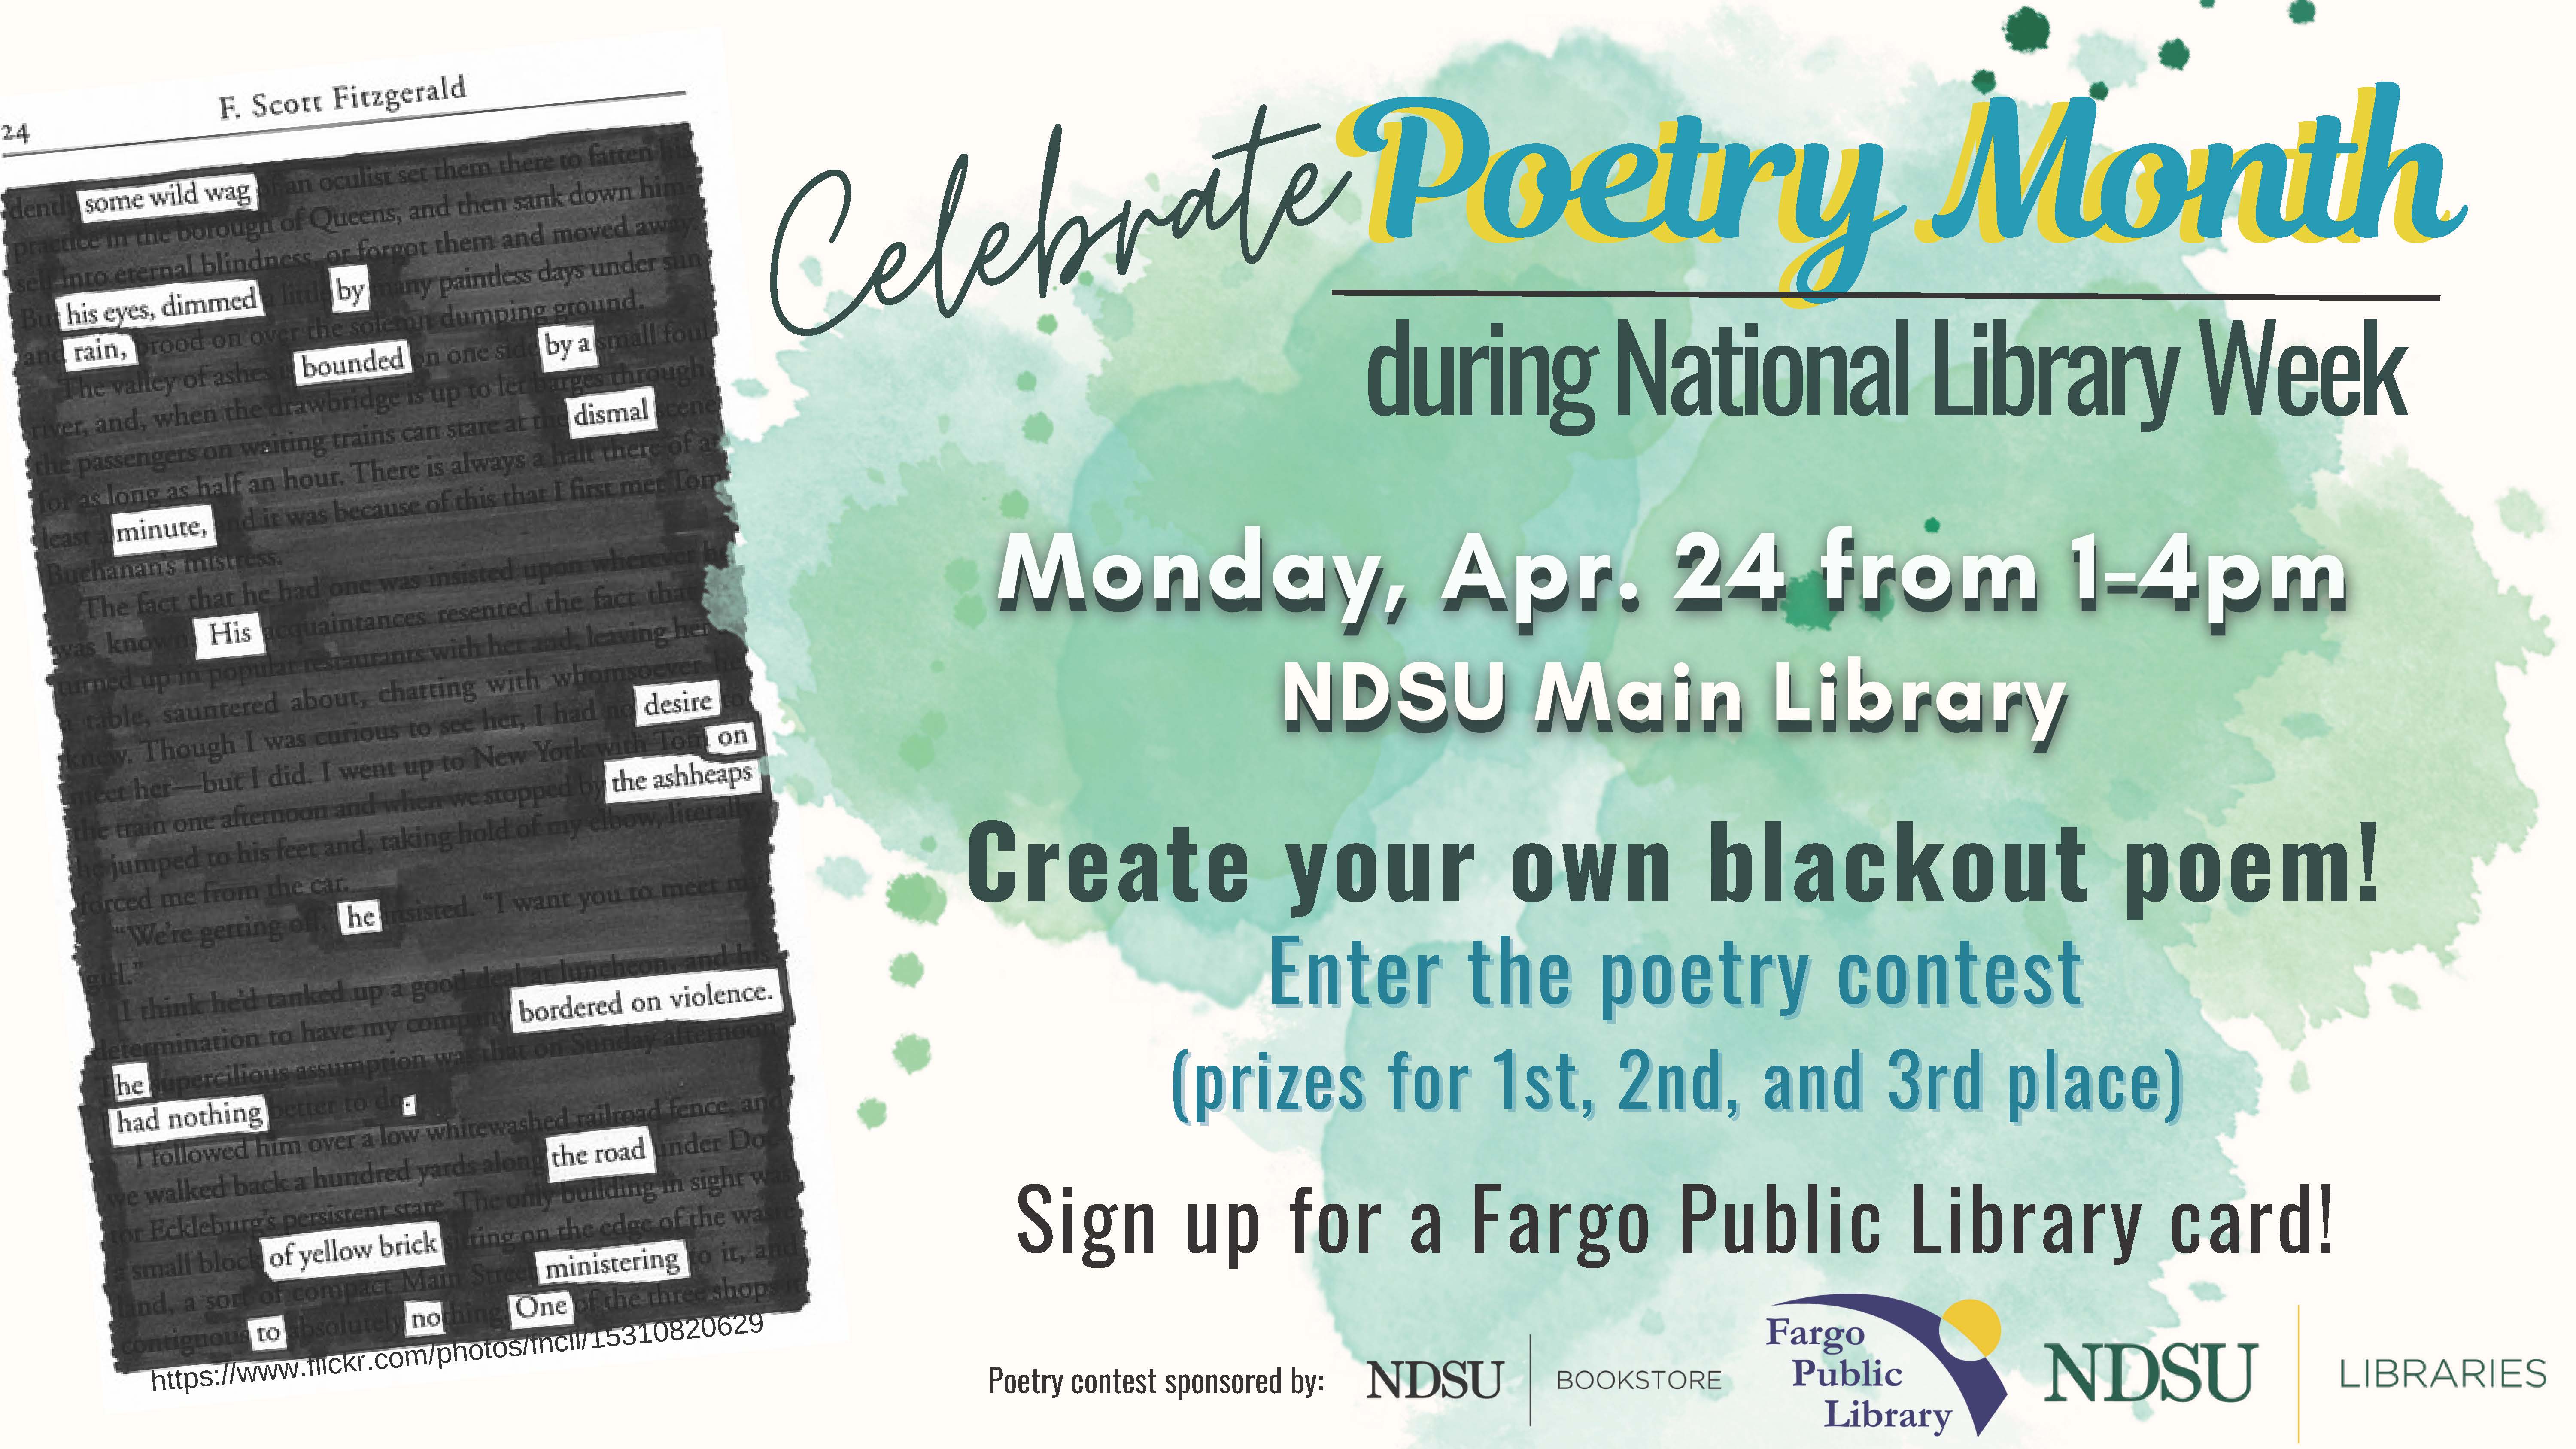 Fargo Public Library Sign-up and Poetry Contest during National Library Week